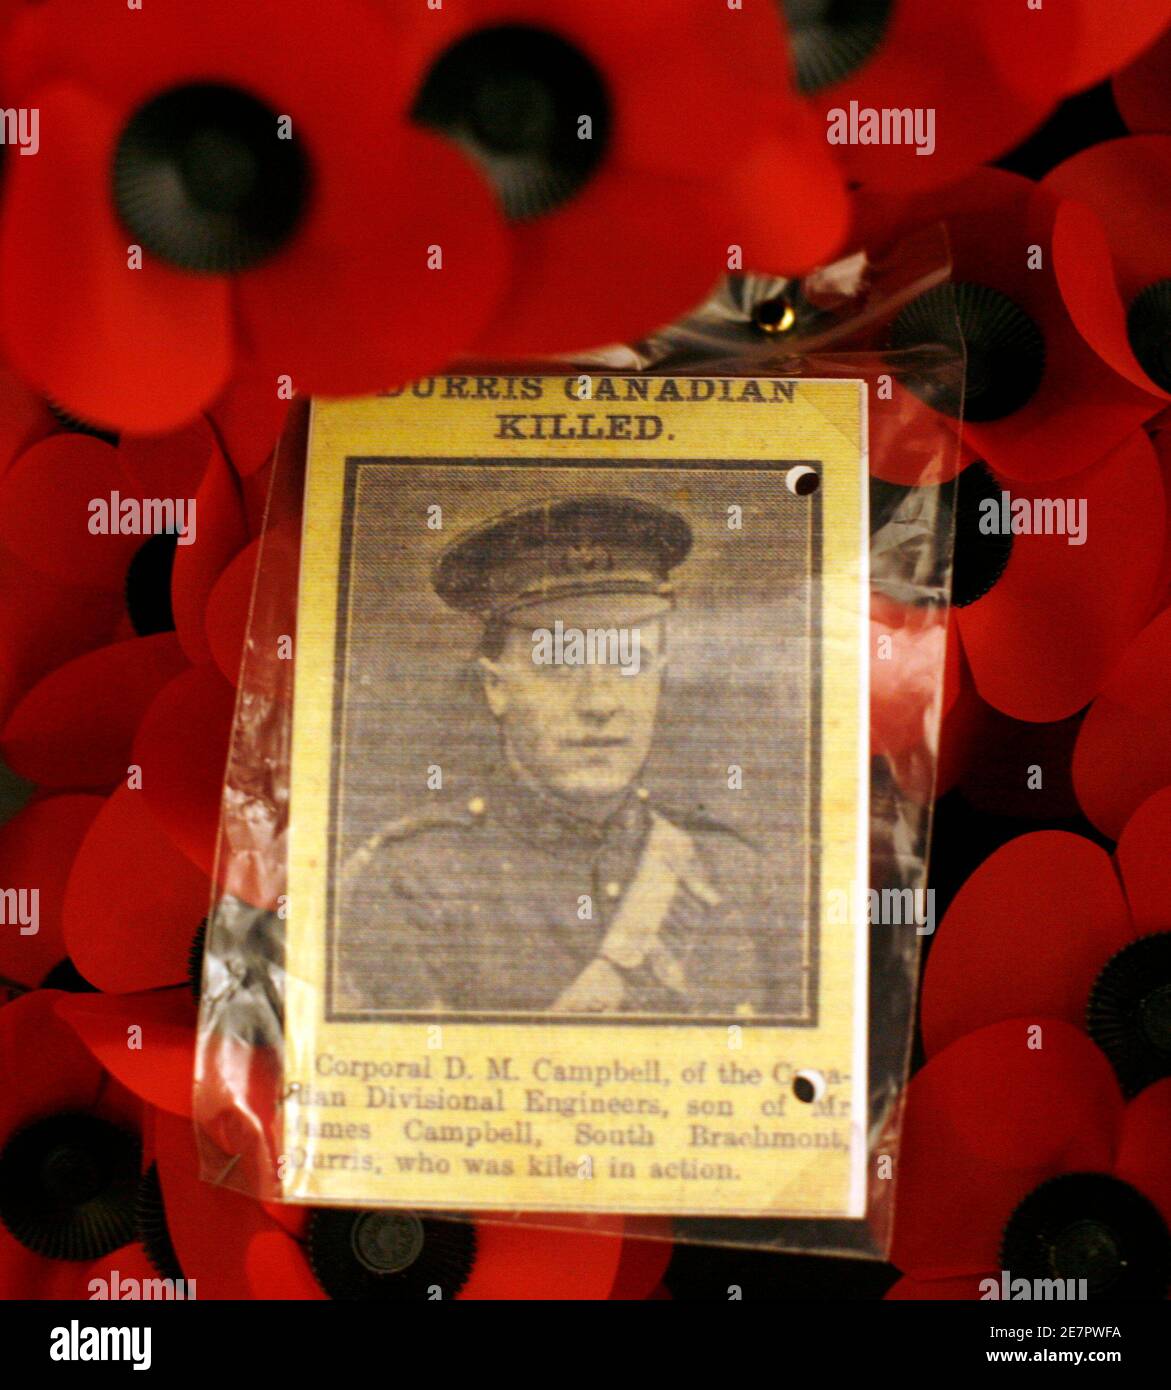 A newspaper clipping is surrounded by wreaths during a Last Post ceremony at the Menin Gate Memorial in Ypres, Belgium November 11, 2008. A group of Canadian veterans is travelling through France and Belgium to commemorate the 90th anniversary of the end of the First World War.       REUTERS/Chris Wattie       (BELGIUM) Stock Photo